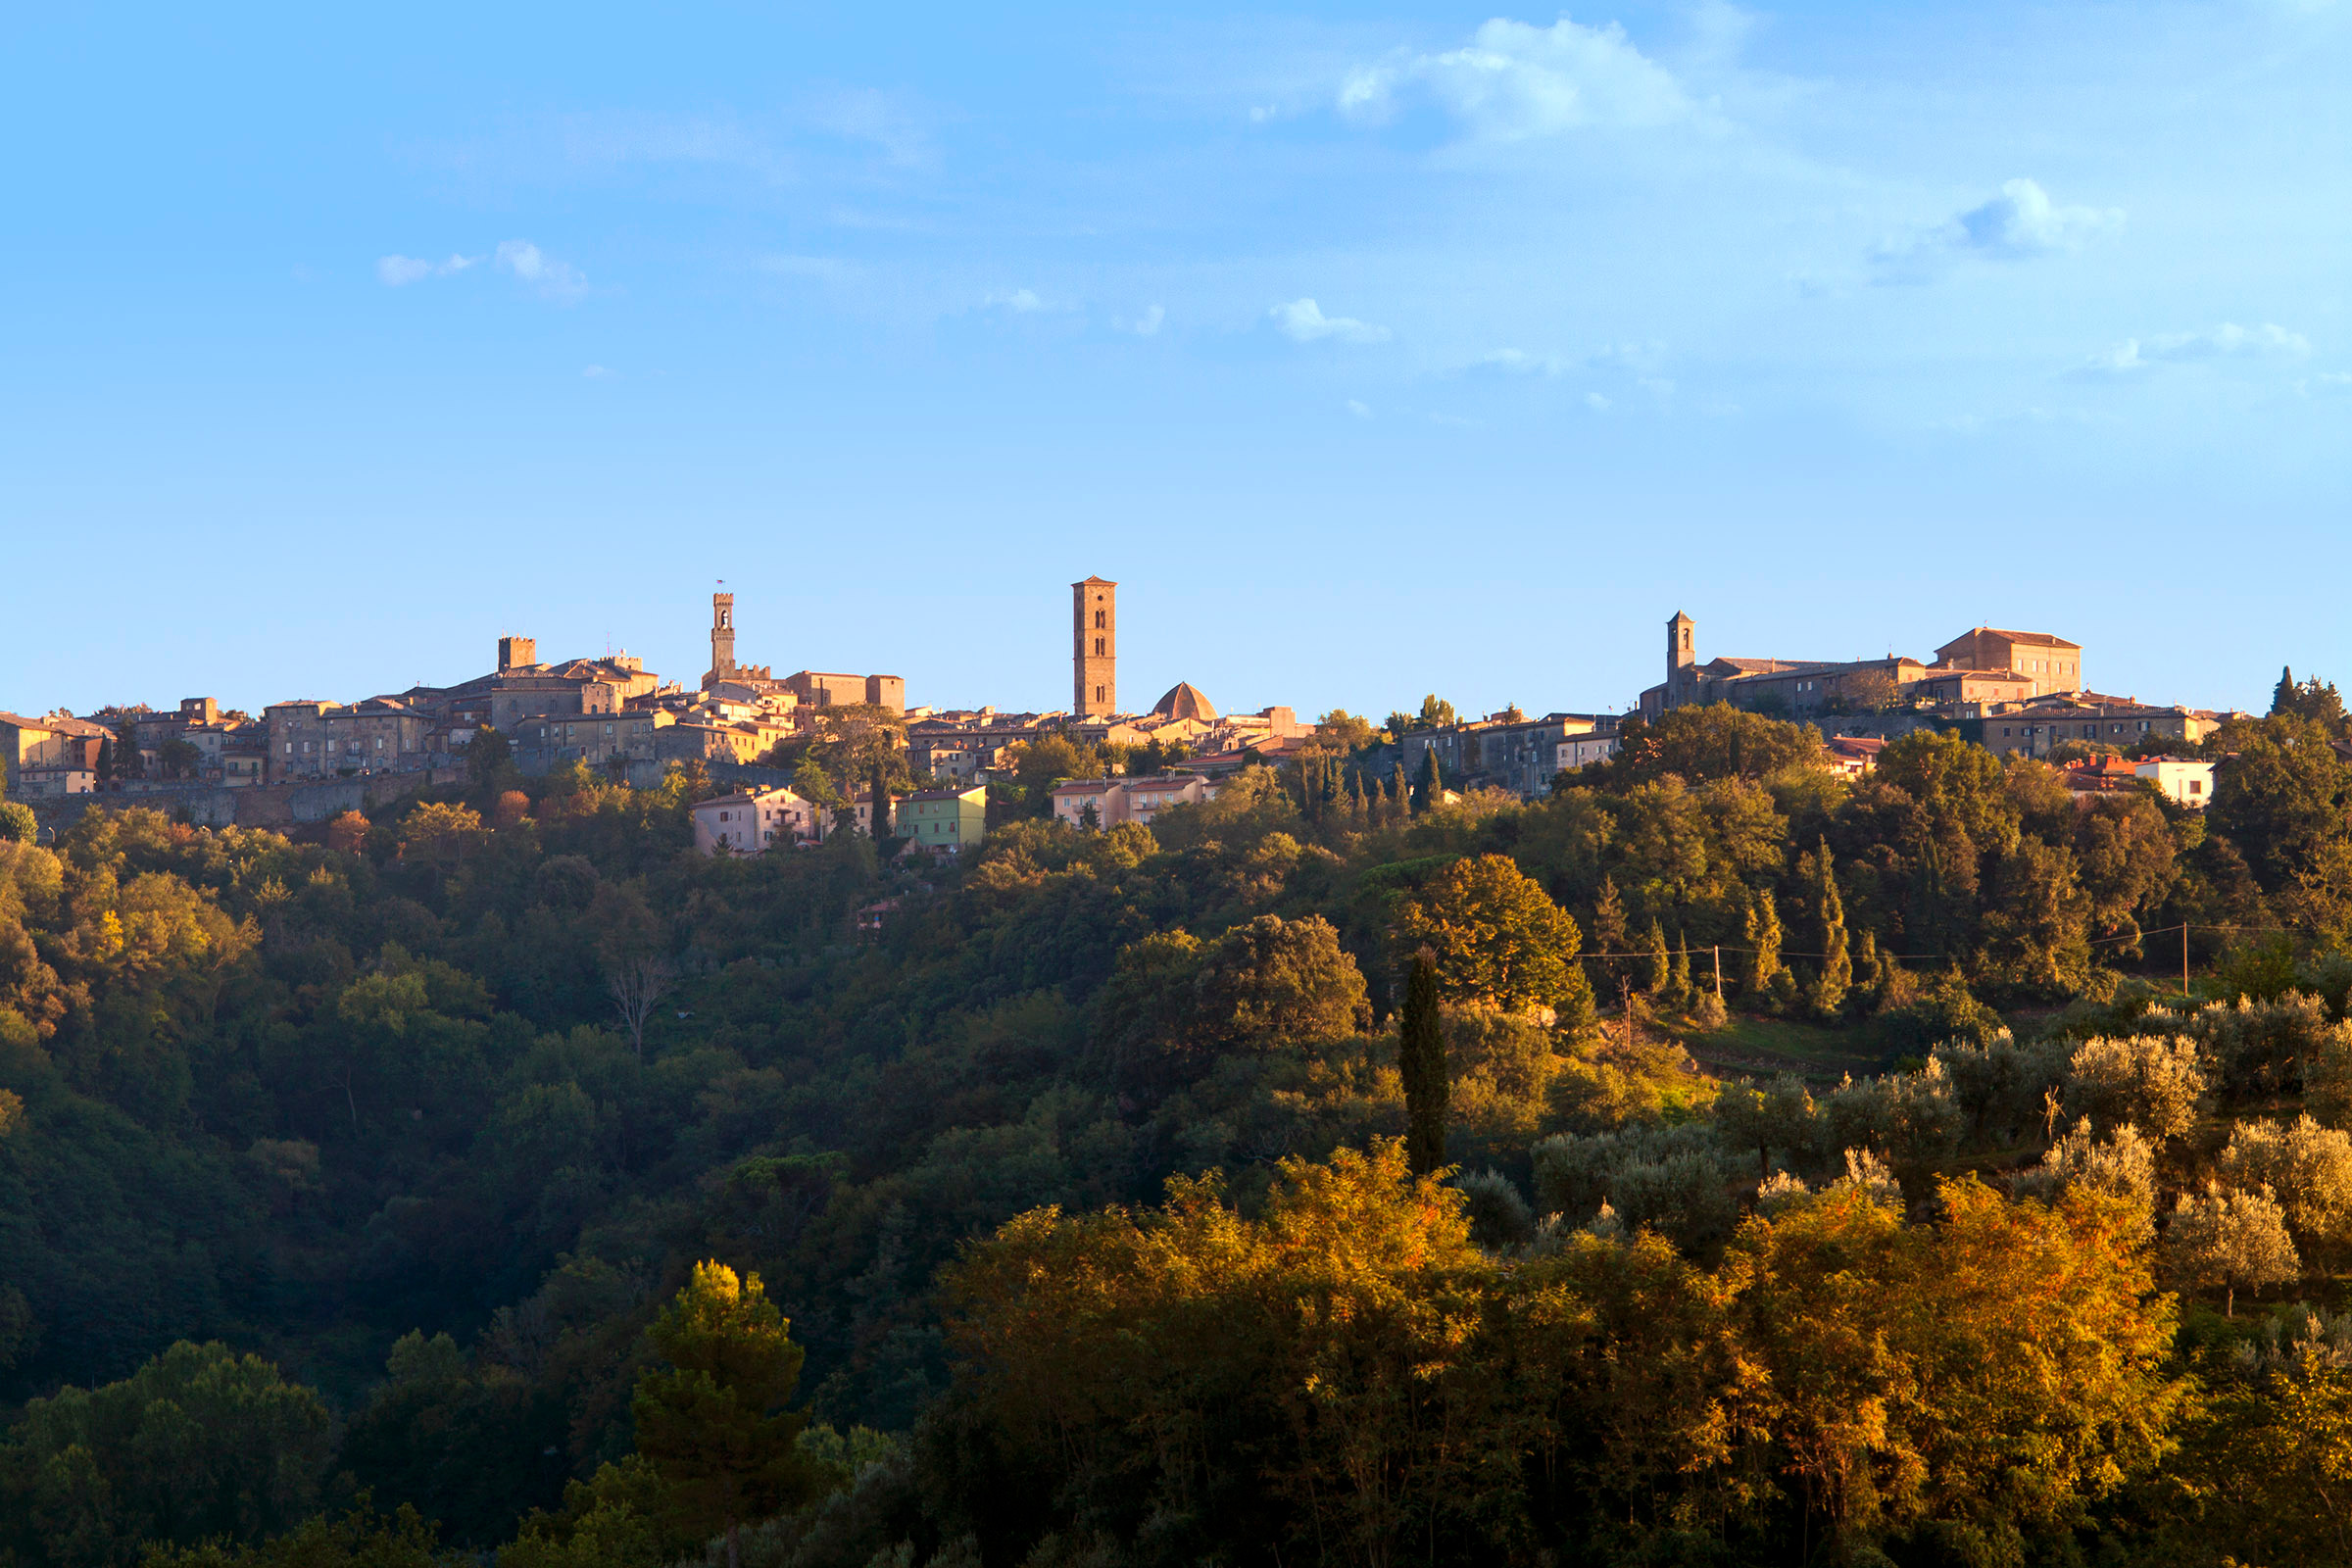 The beautiful Tuscan hilltop town of Volterra